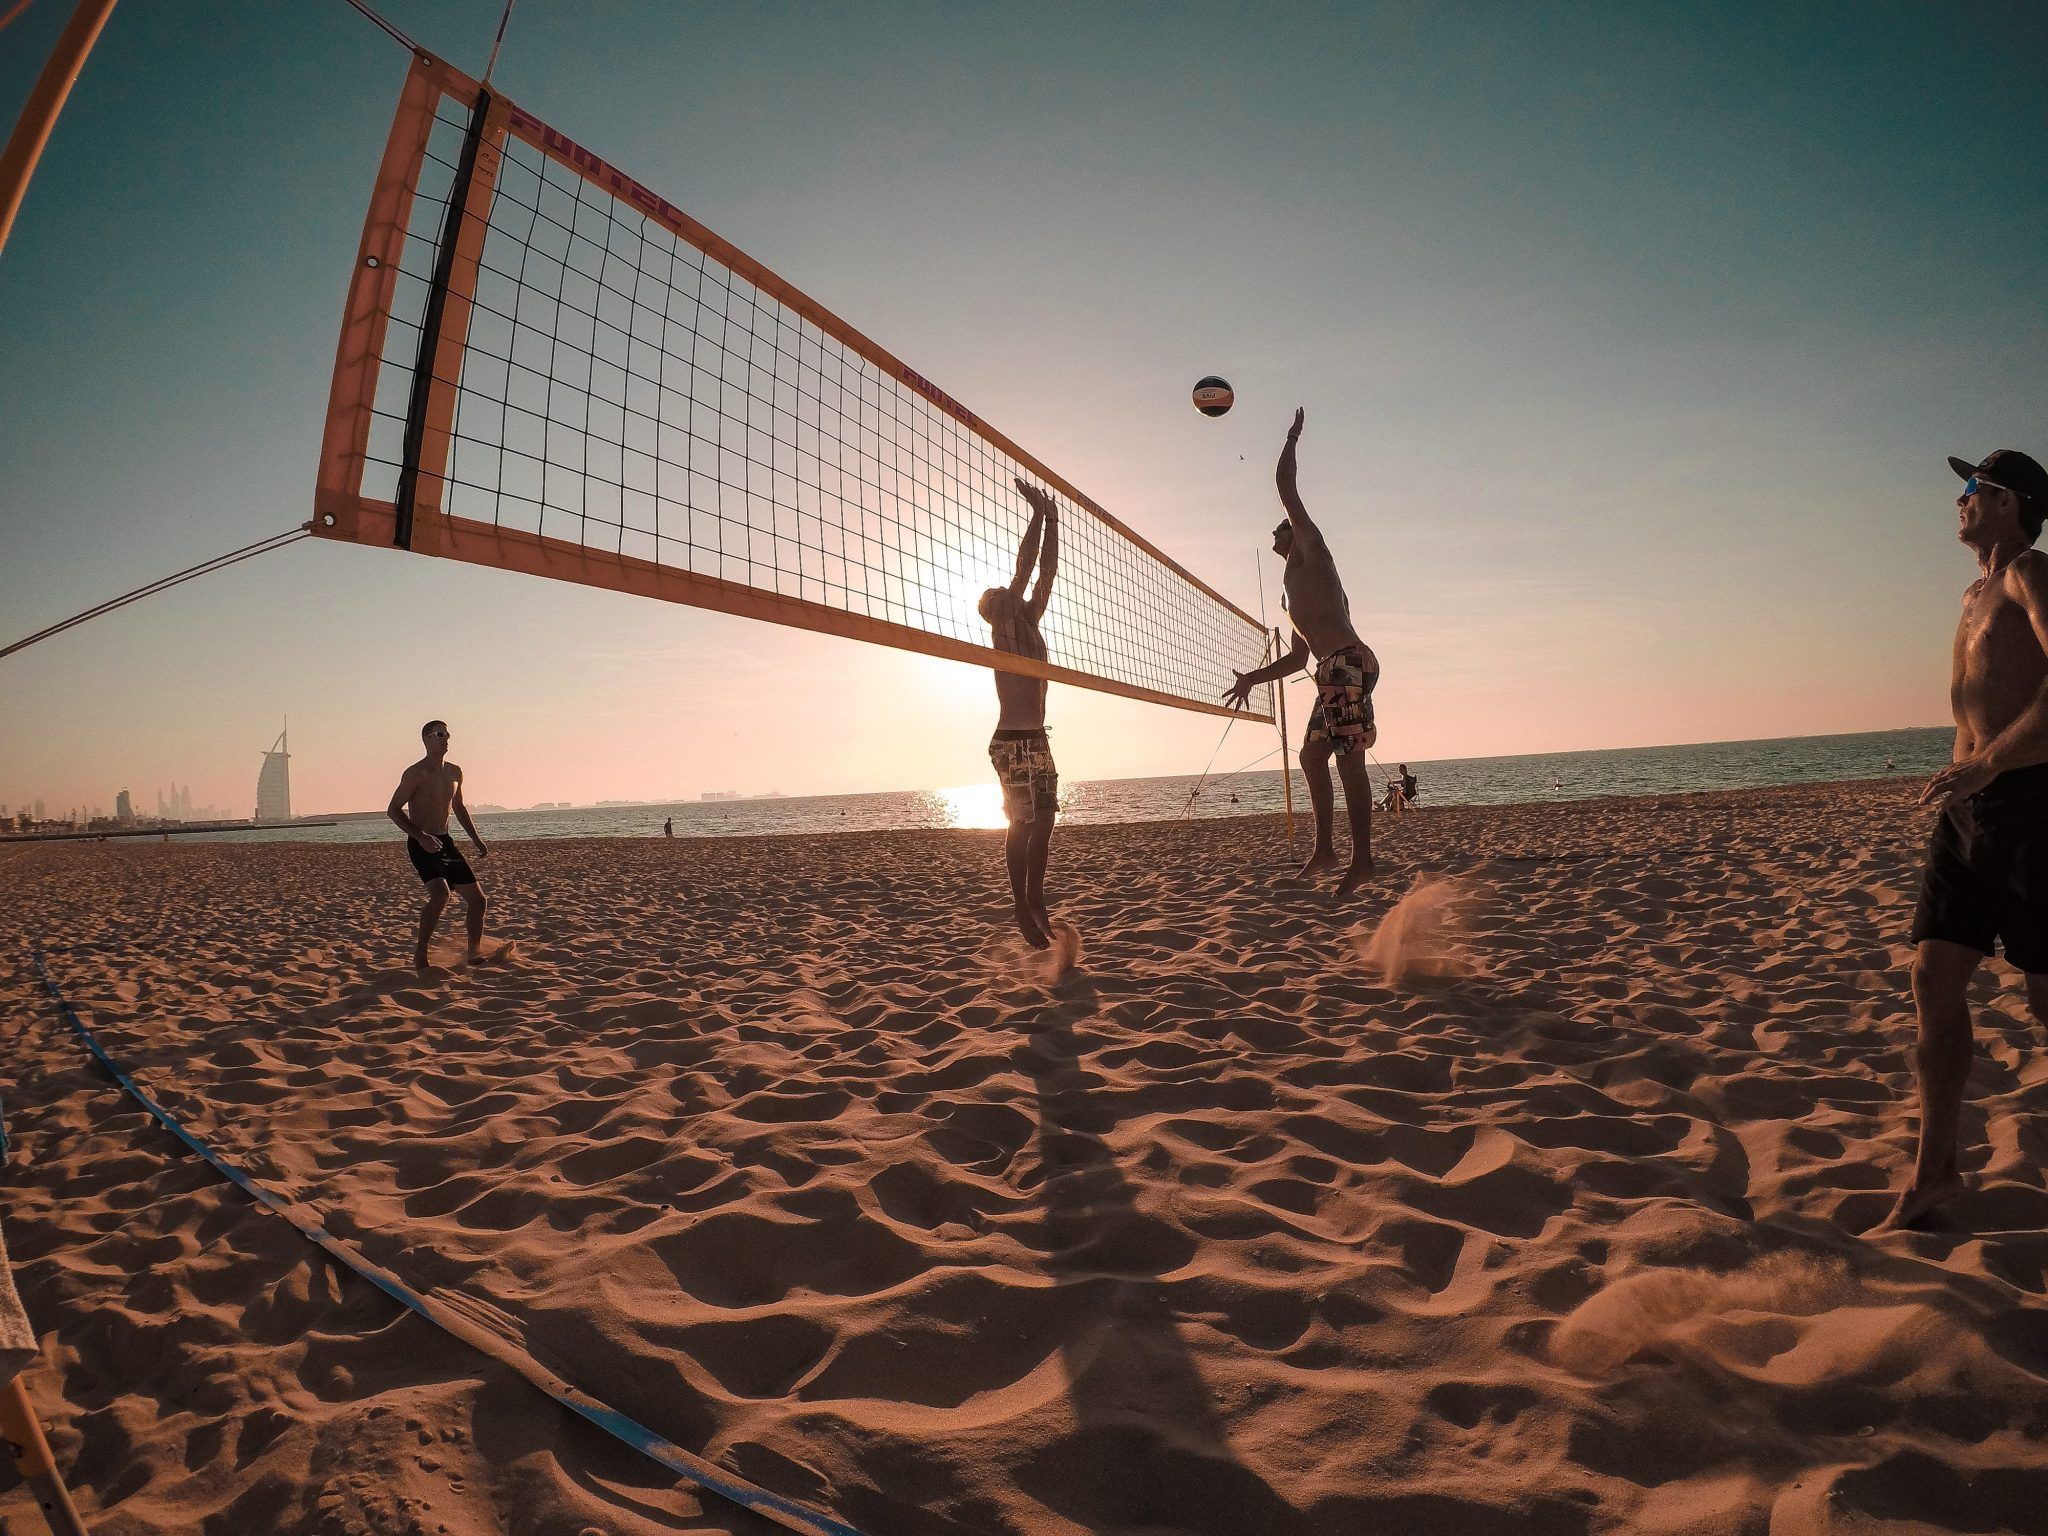 A group of people playing beach volleyball - Volleyball